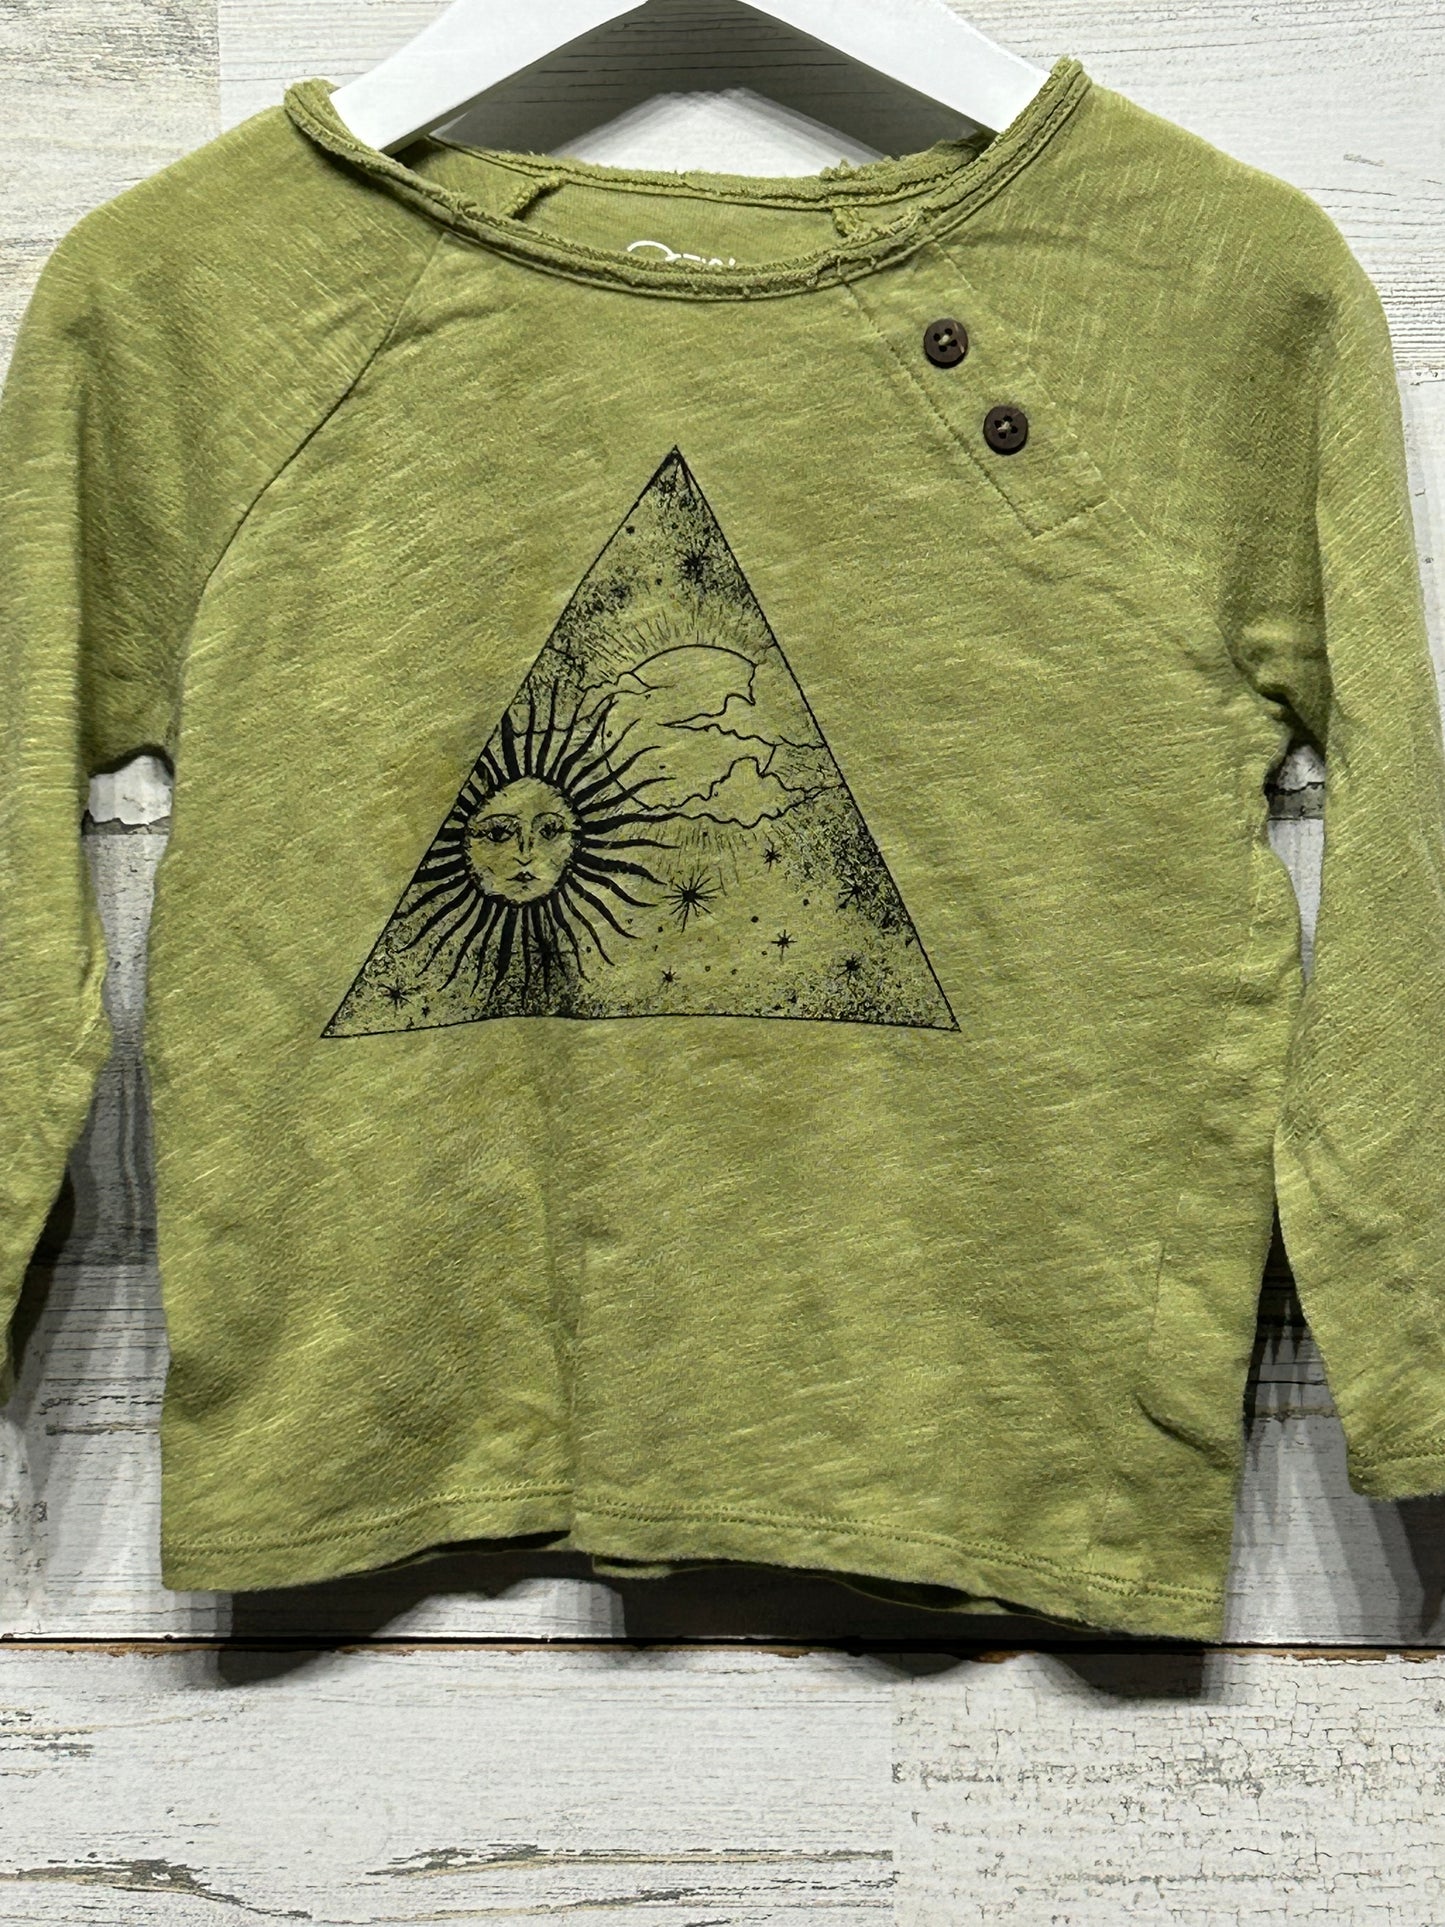 Size 2t Art Class Long Sleeve Shirt - Good Used Condition